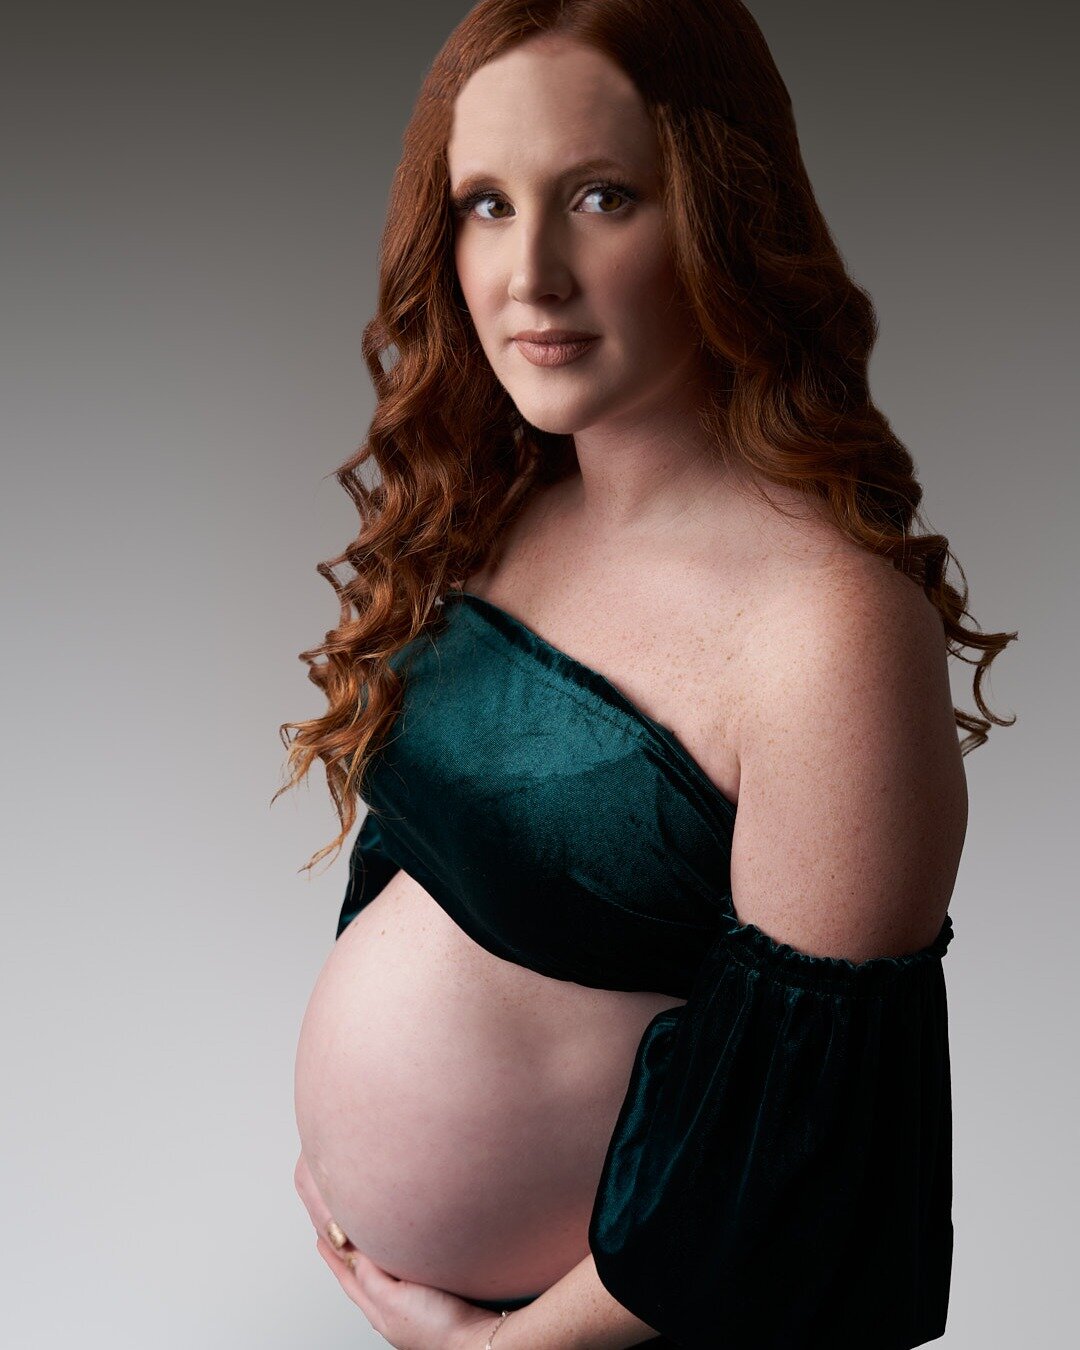 Look at this gorgeous soon to be mama! Brooke rocked her maternity session. We took a variety of photos and used 4-5 of our client closet dresses! During our photoshoot I would show her the back of my camera and she would say how beautiful she felt a